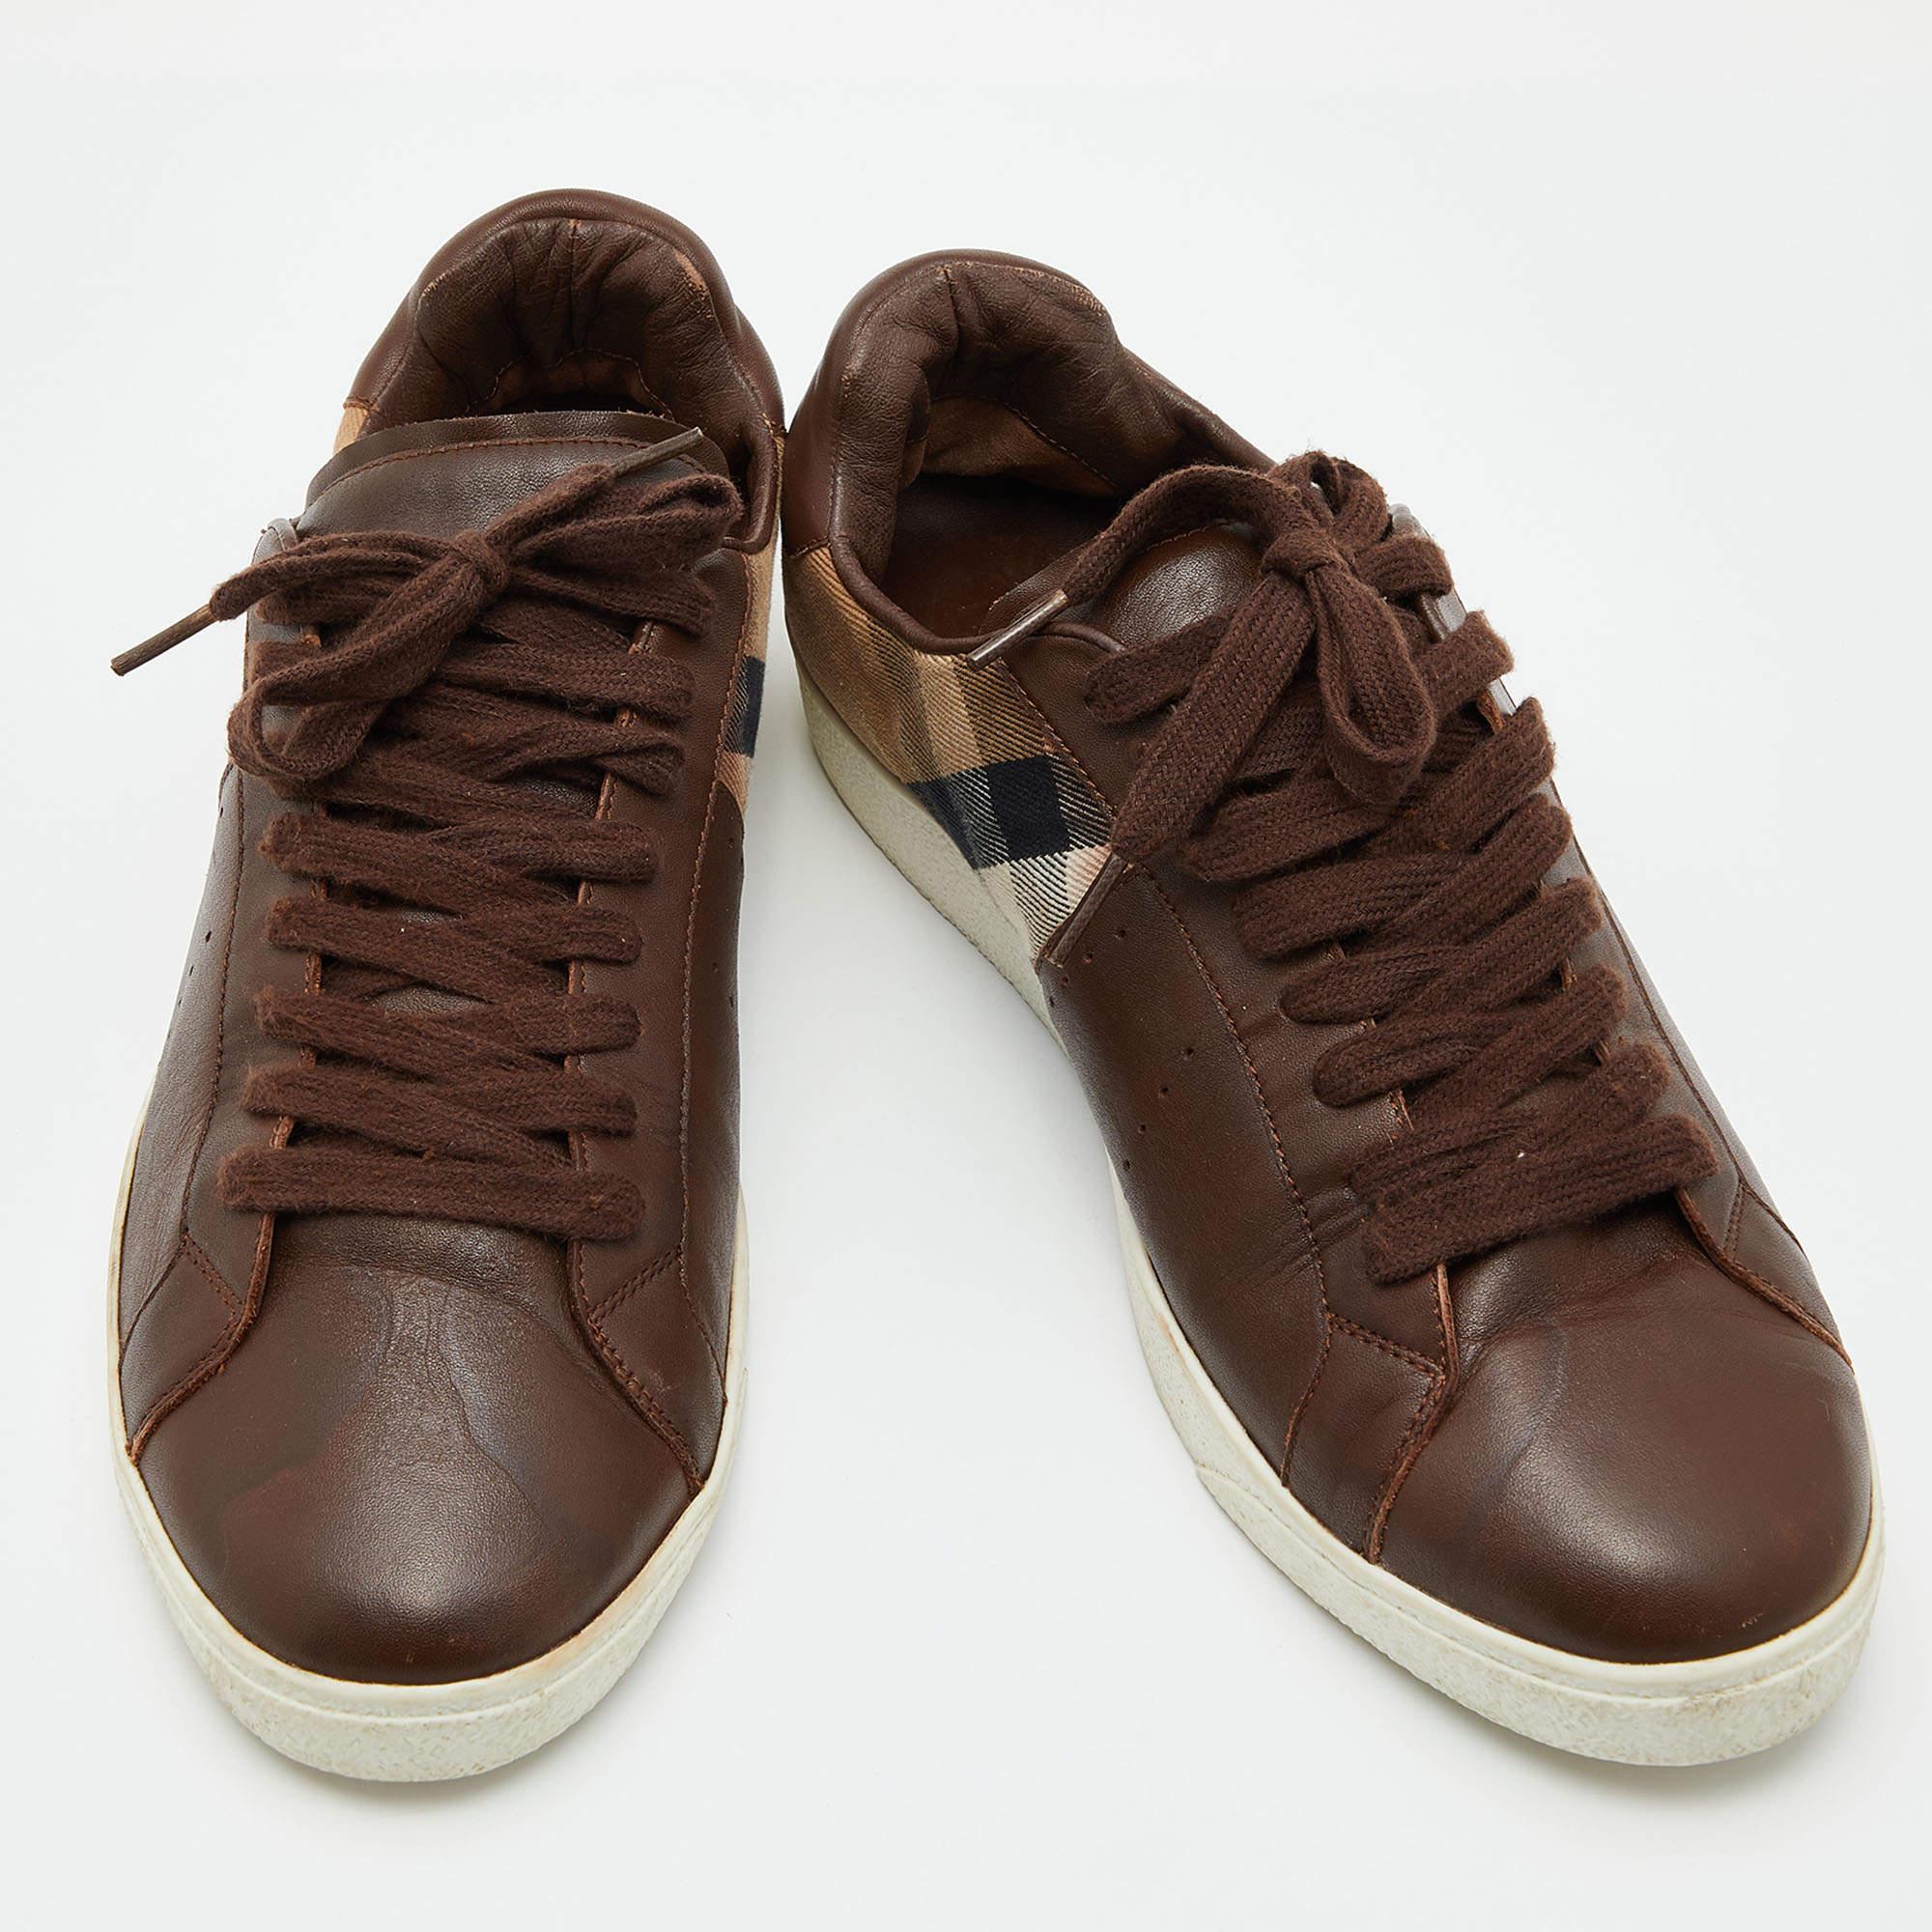 Give your outfit a luxe update with this pair of Burberry sneakers. The creation is sewn perfectly to help you make a statement in them for a long time.

